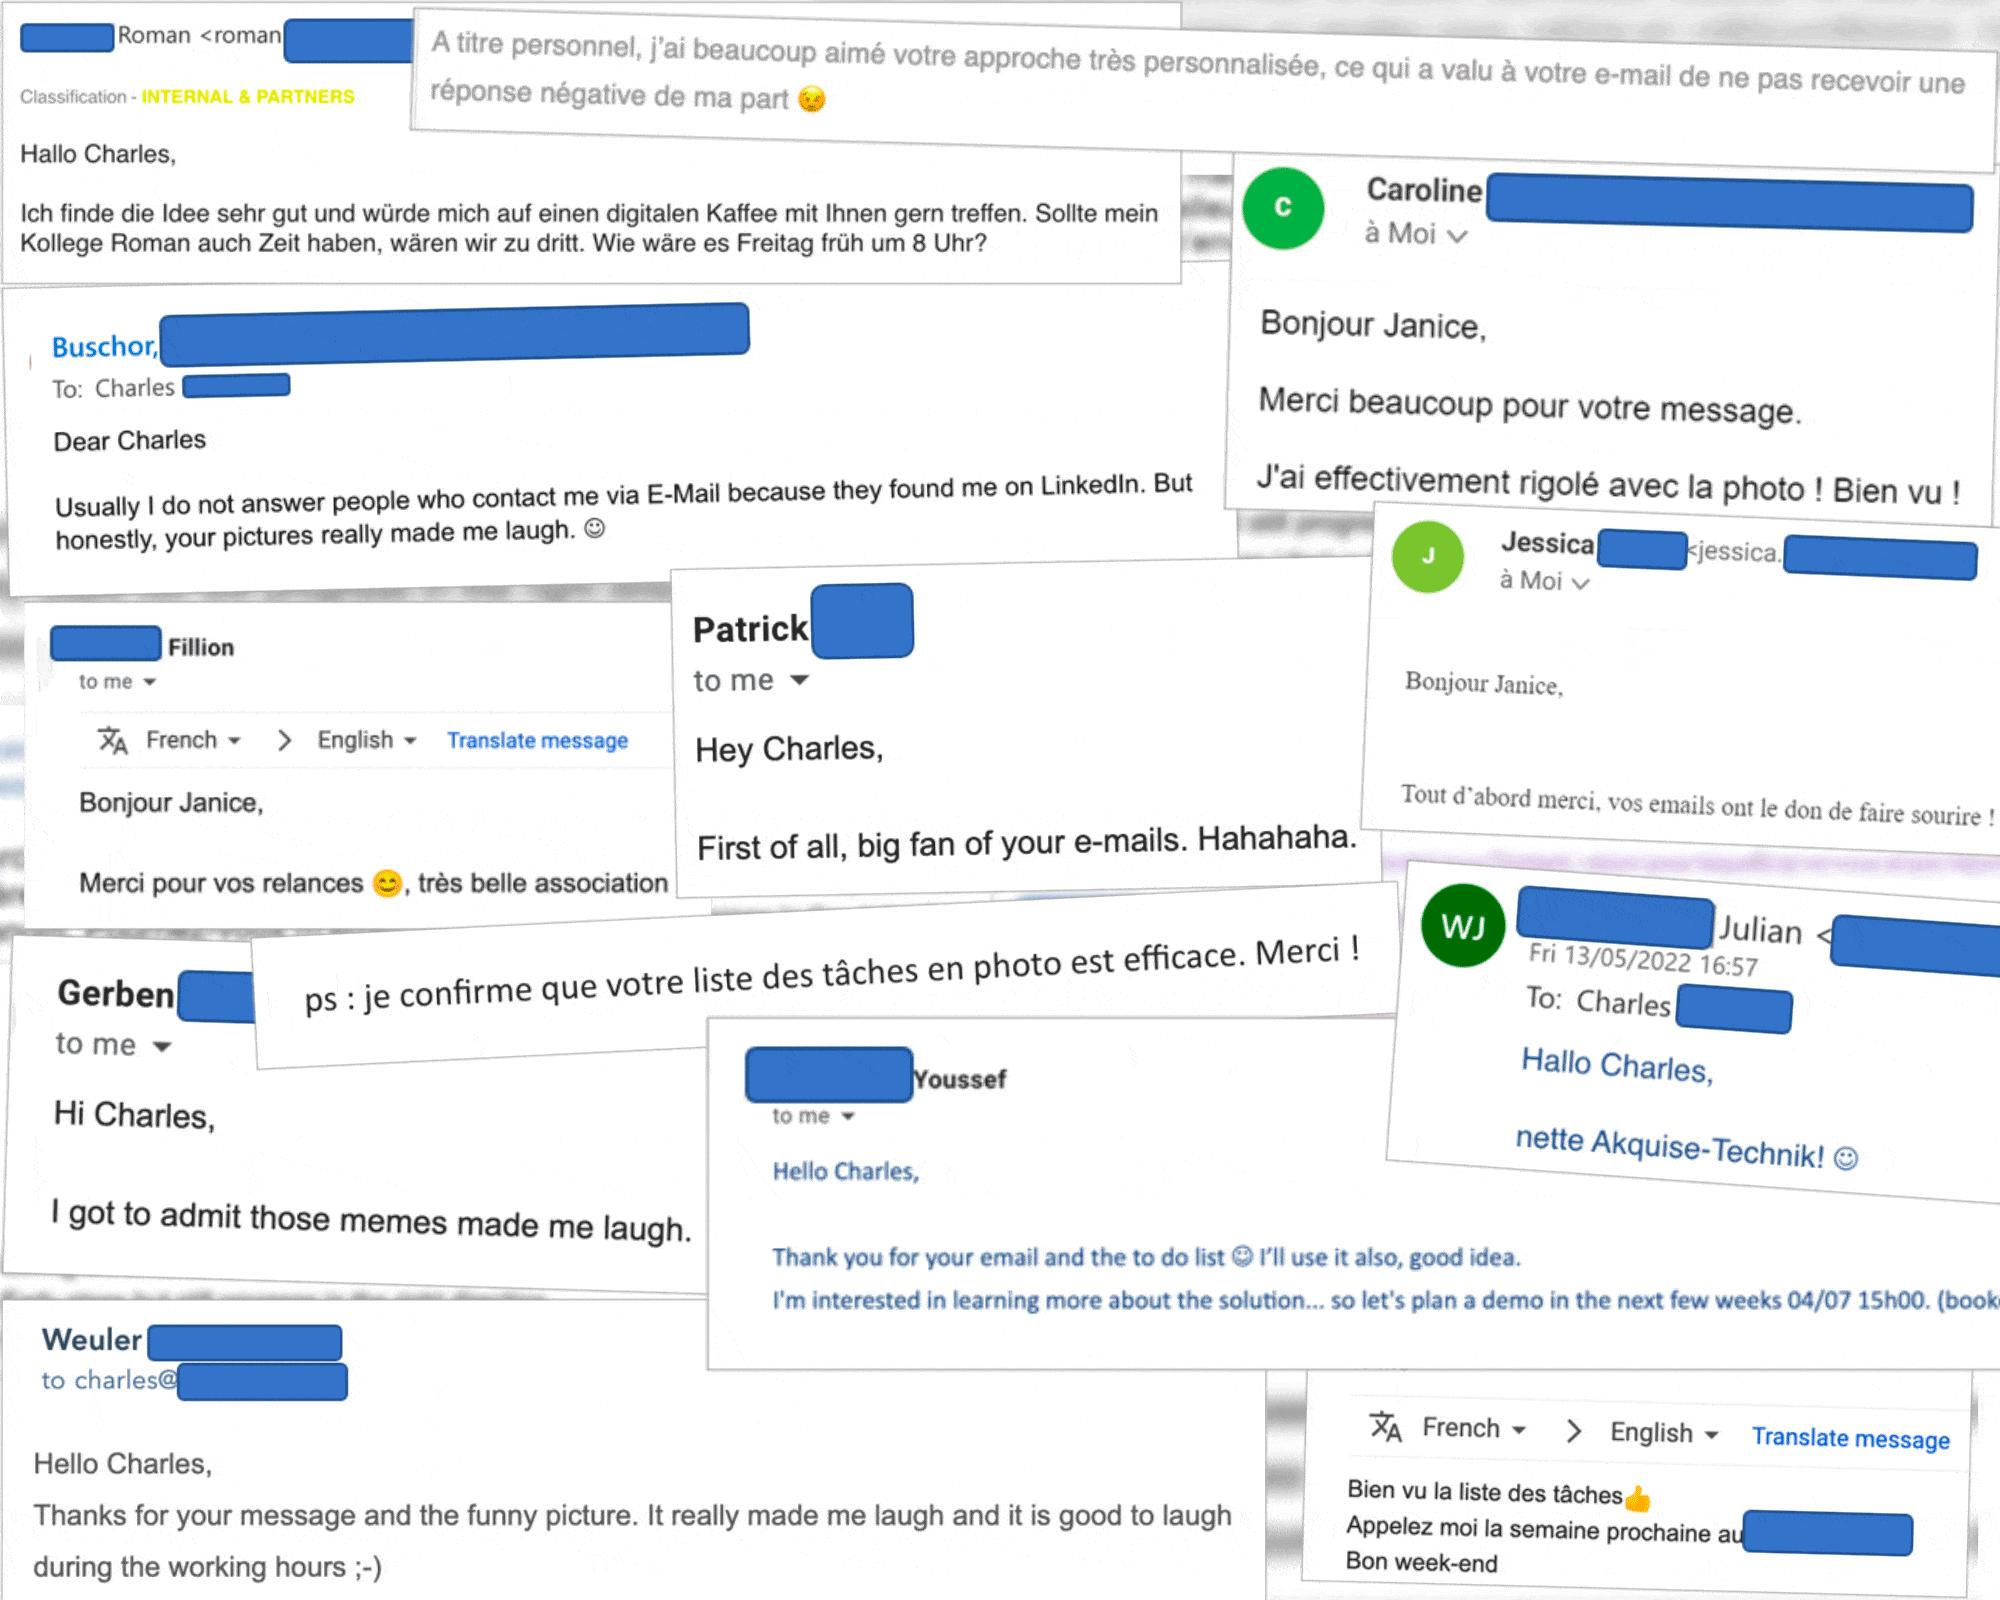 positive replies (from clients)